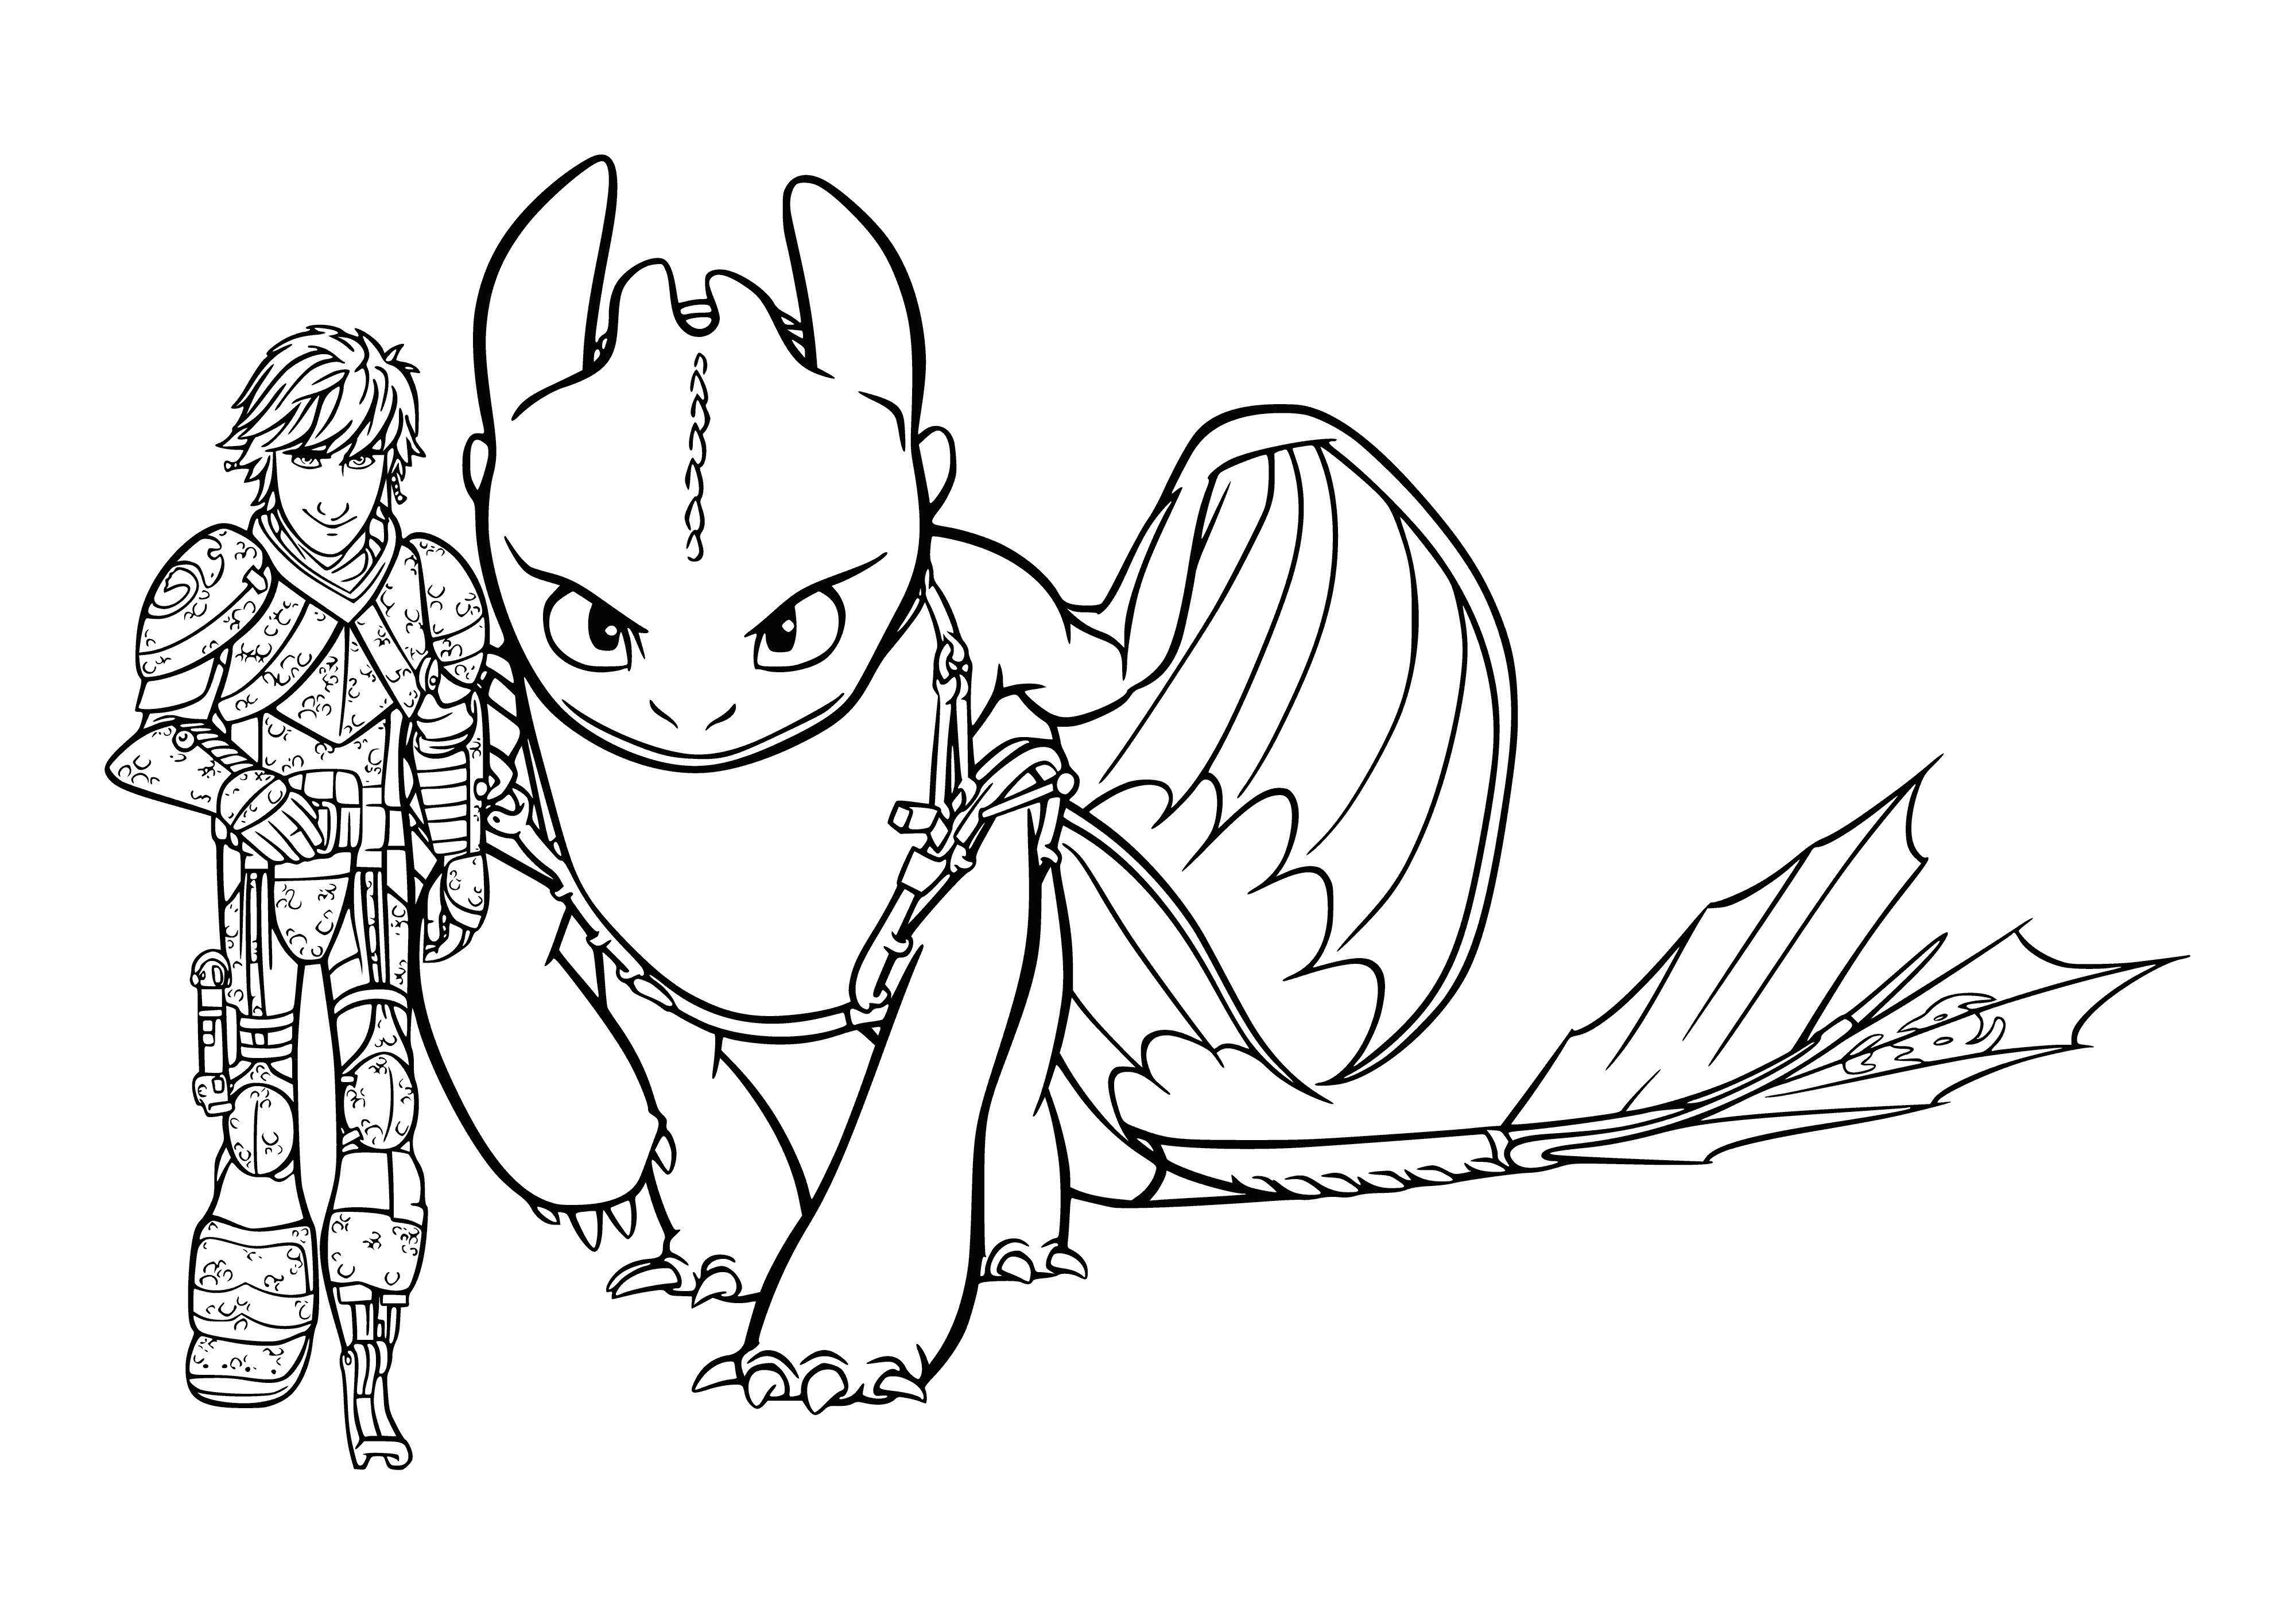 coloring page: Two dragons, Iking & Bezzubik, show contrasting expressions; Iking fierce, Bezzubik scared. Iking's wings spread, ferociously barring large teeth.